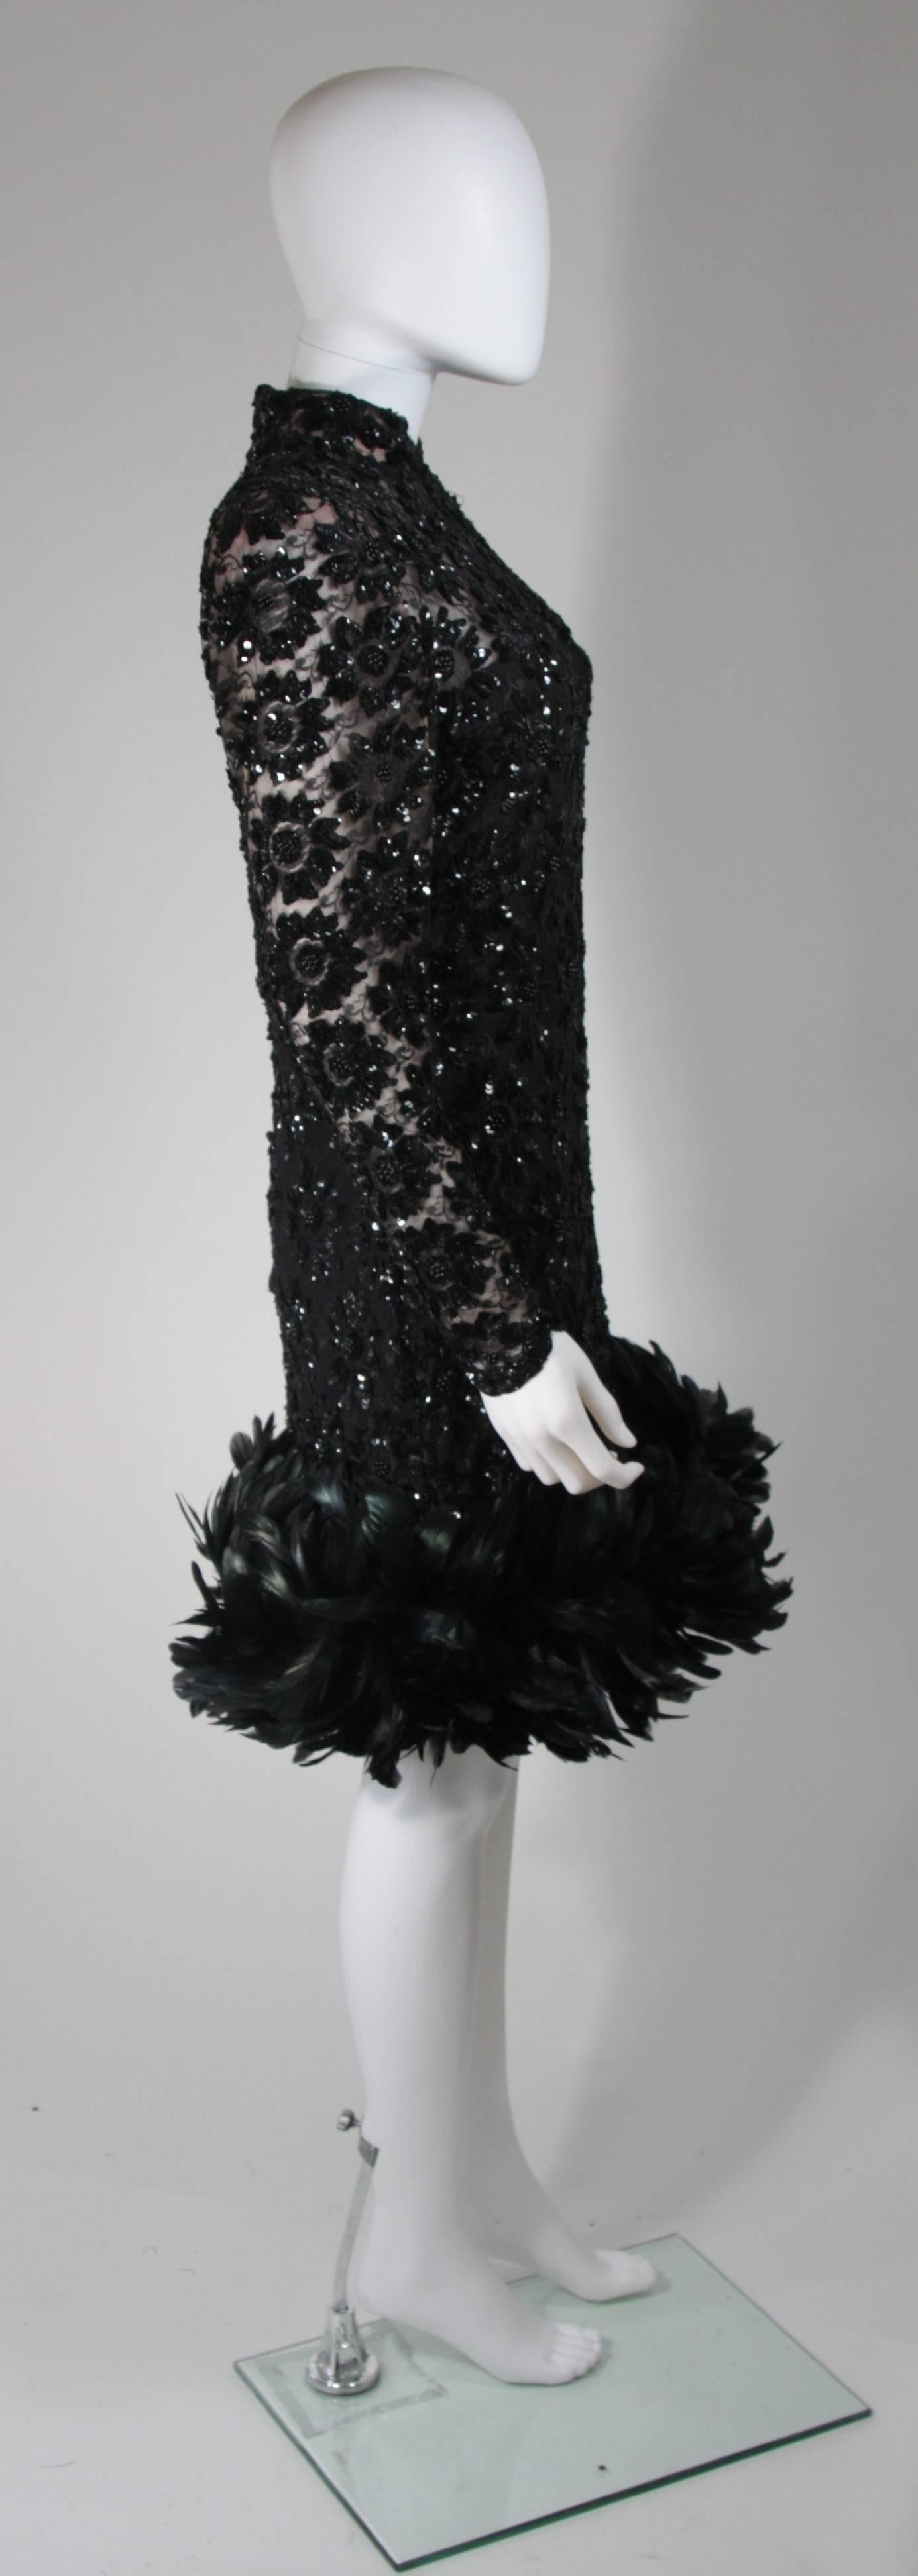 Travilla Black Sequin Beaded Cocktail Dress with Feather Hem Size Small Medium In Excellent Condition For Sale In Los Angeles, CA